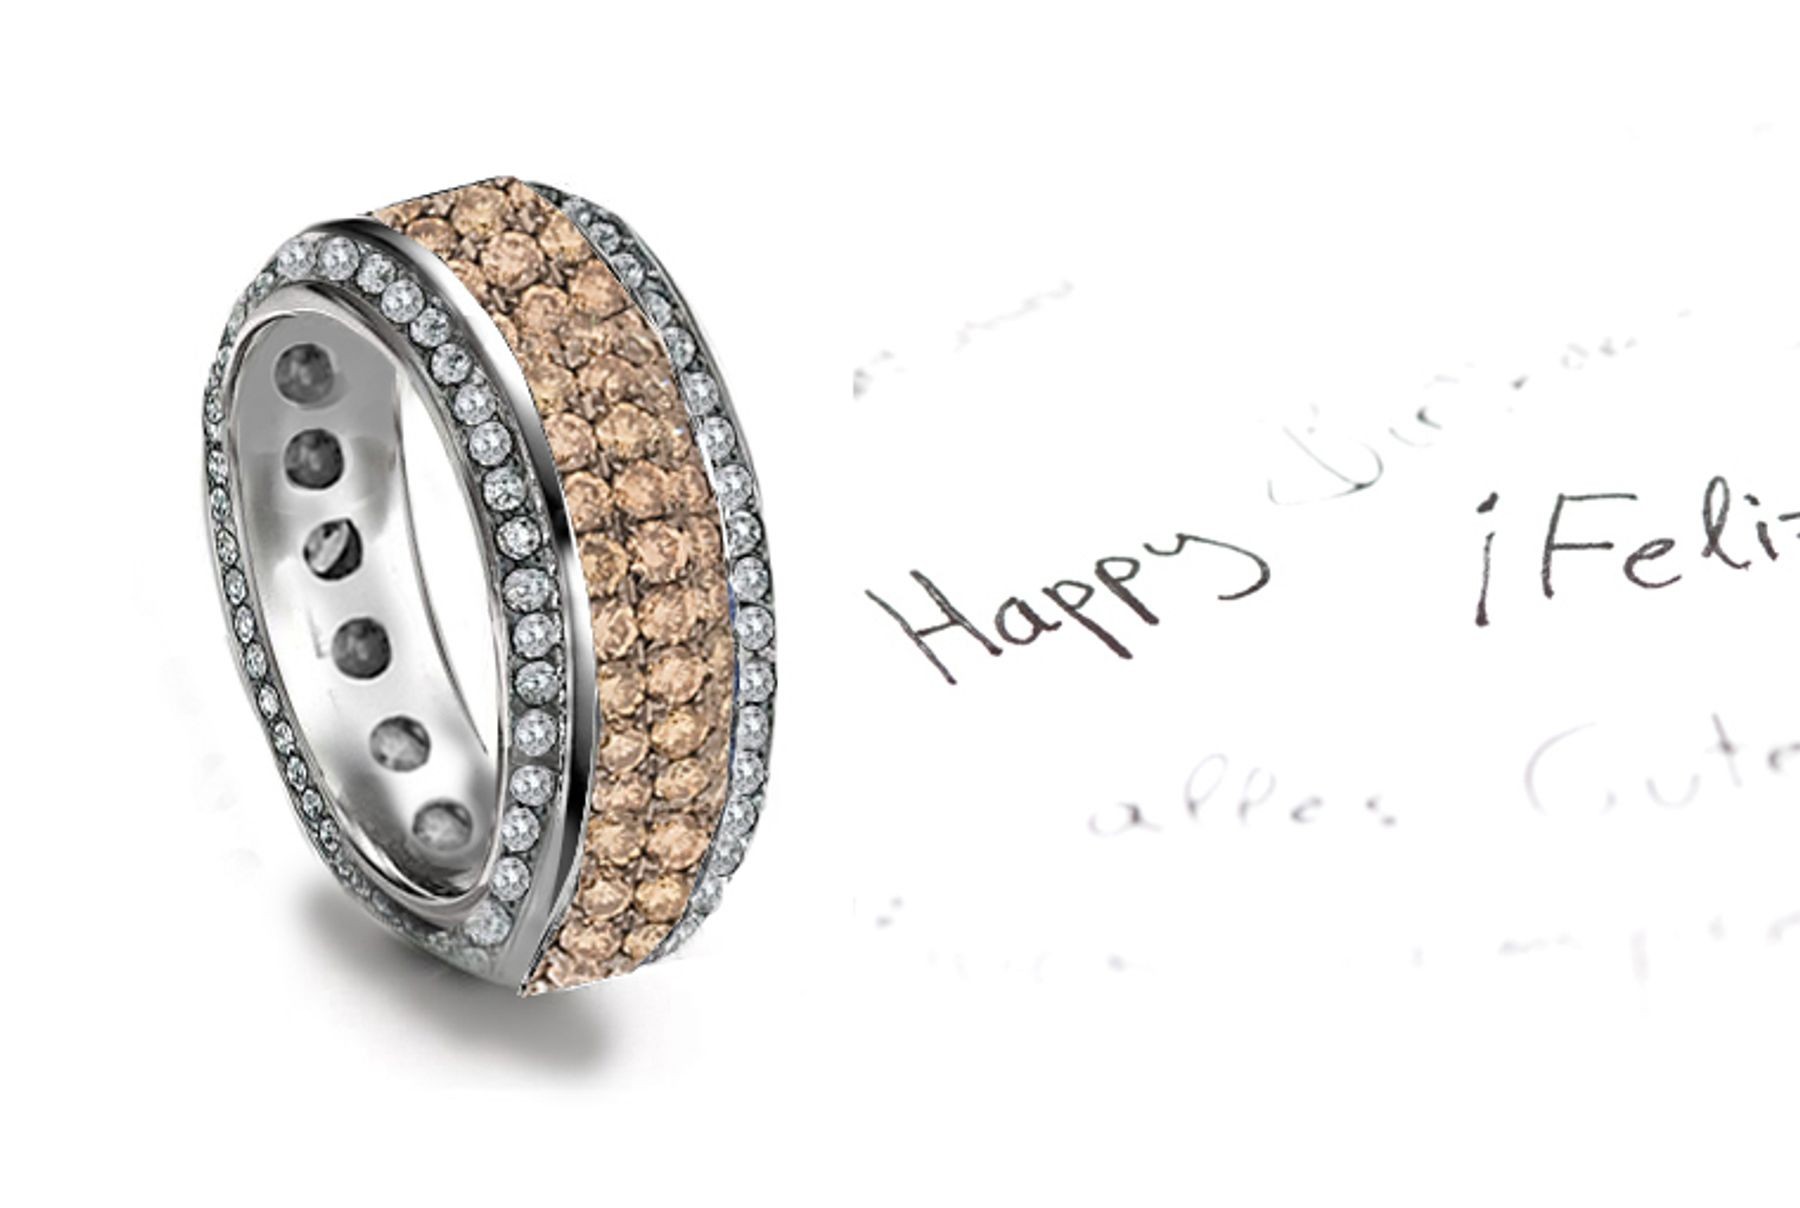 Elegance: 6 mm Wide Micropavee Crusted Brown Diamonds in Center & Diamond Decorated Sides